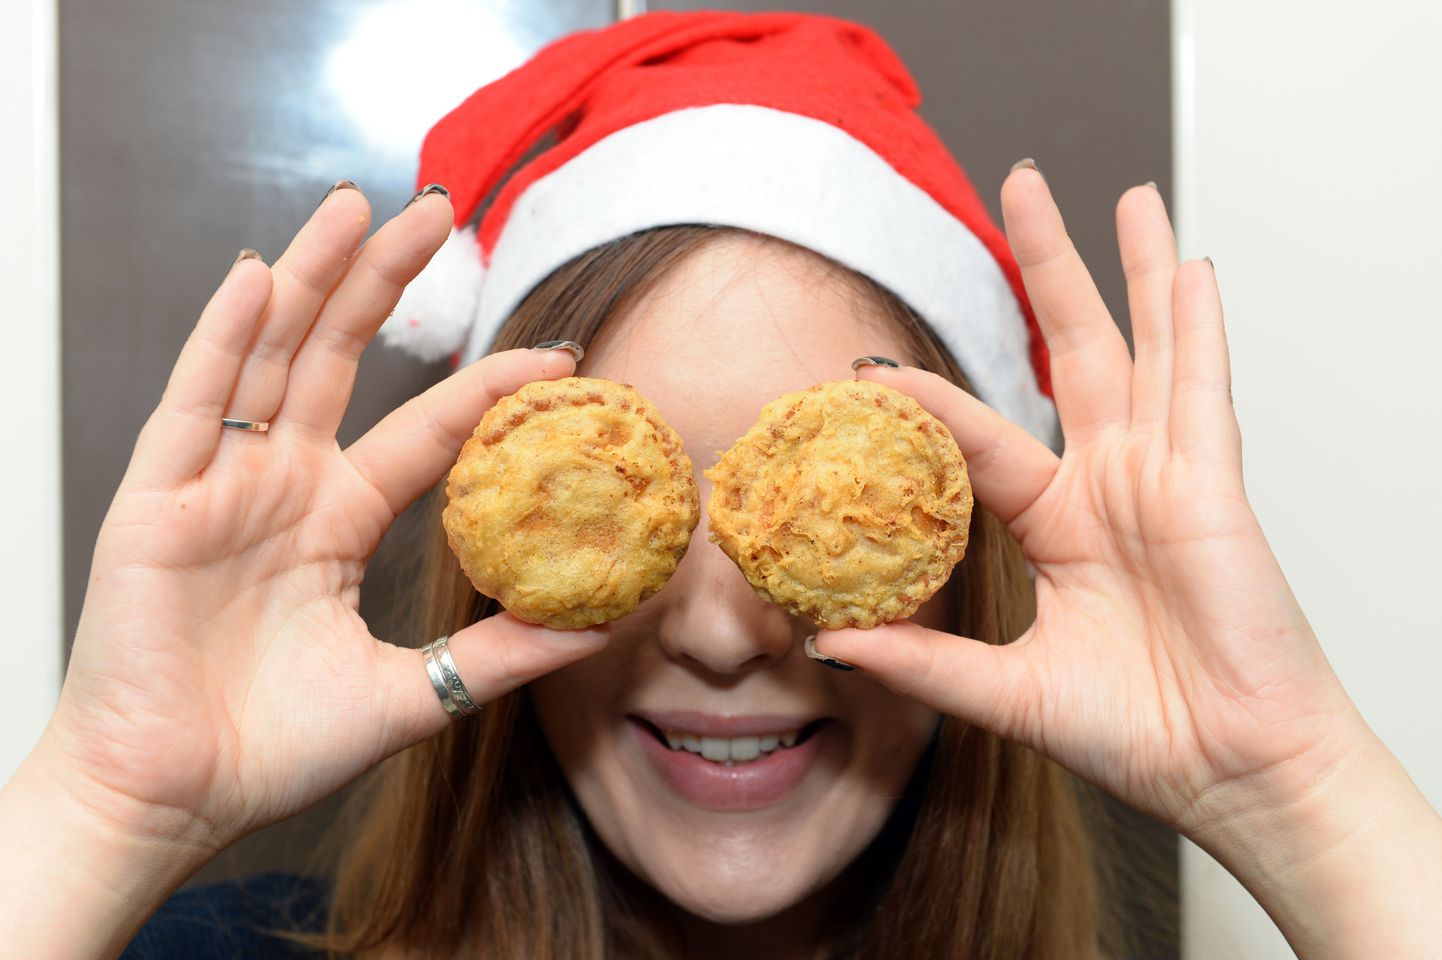 PIC FROM CATERS NEWS - (PICTURED: Hannah Crocker from birmingham with the deep fried mince pies.) - For a lighter alternative look away now - one chip shop has got two very festive offerings that have been fried to perfection. Le Codfather in Birmingham has created a deep fried mince pie and yule log, for those itching for a batter snack to eat in front of the Queens speech this year. Sam Yafaig, dips the pies in batter before popping them in the fryer for five minutes on each side, before they are ready to serve. But at an average of 280 calories a pop, before theyve been battered, those planning on sampling the extravagant delicacies might want to ask Santa Claus for a larger belt. SEE CATERS COPY.